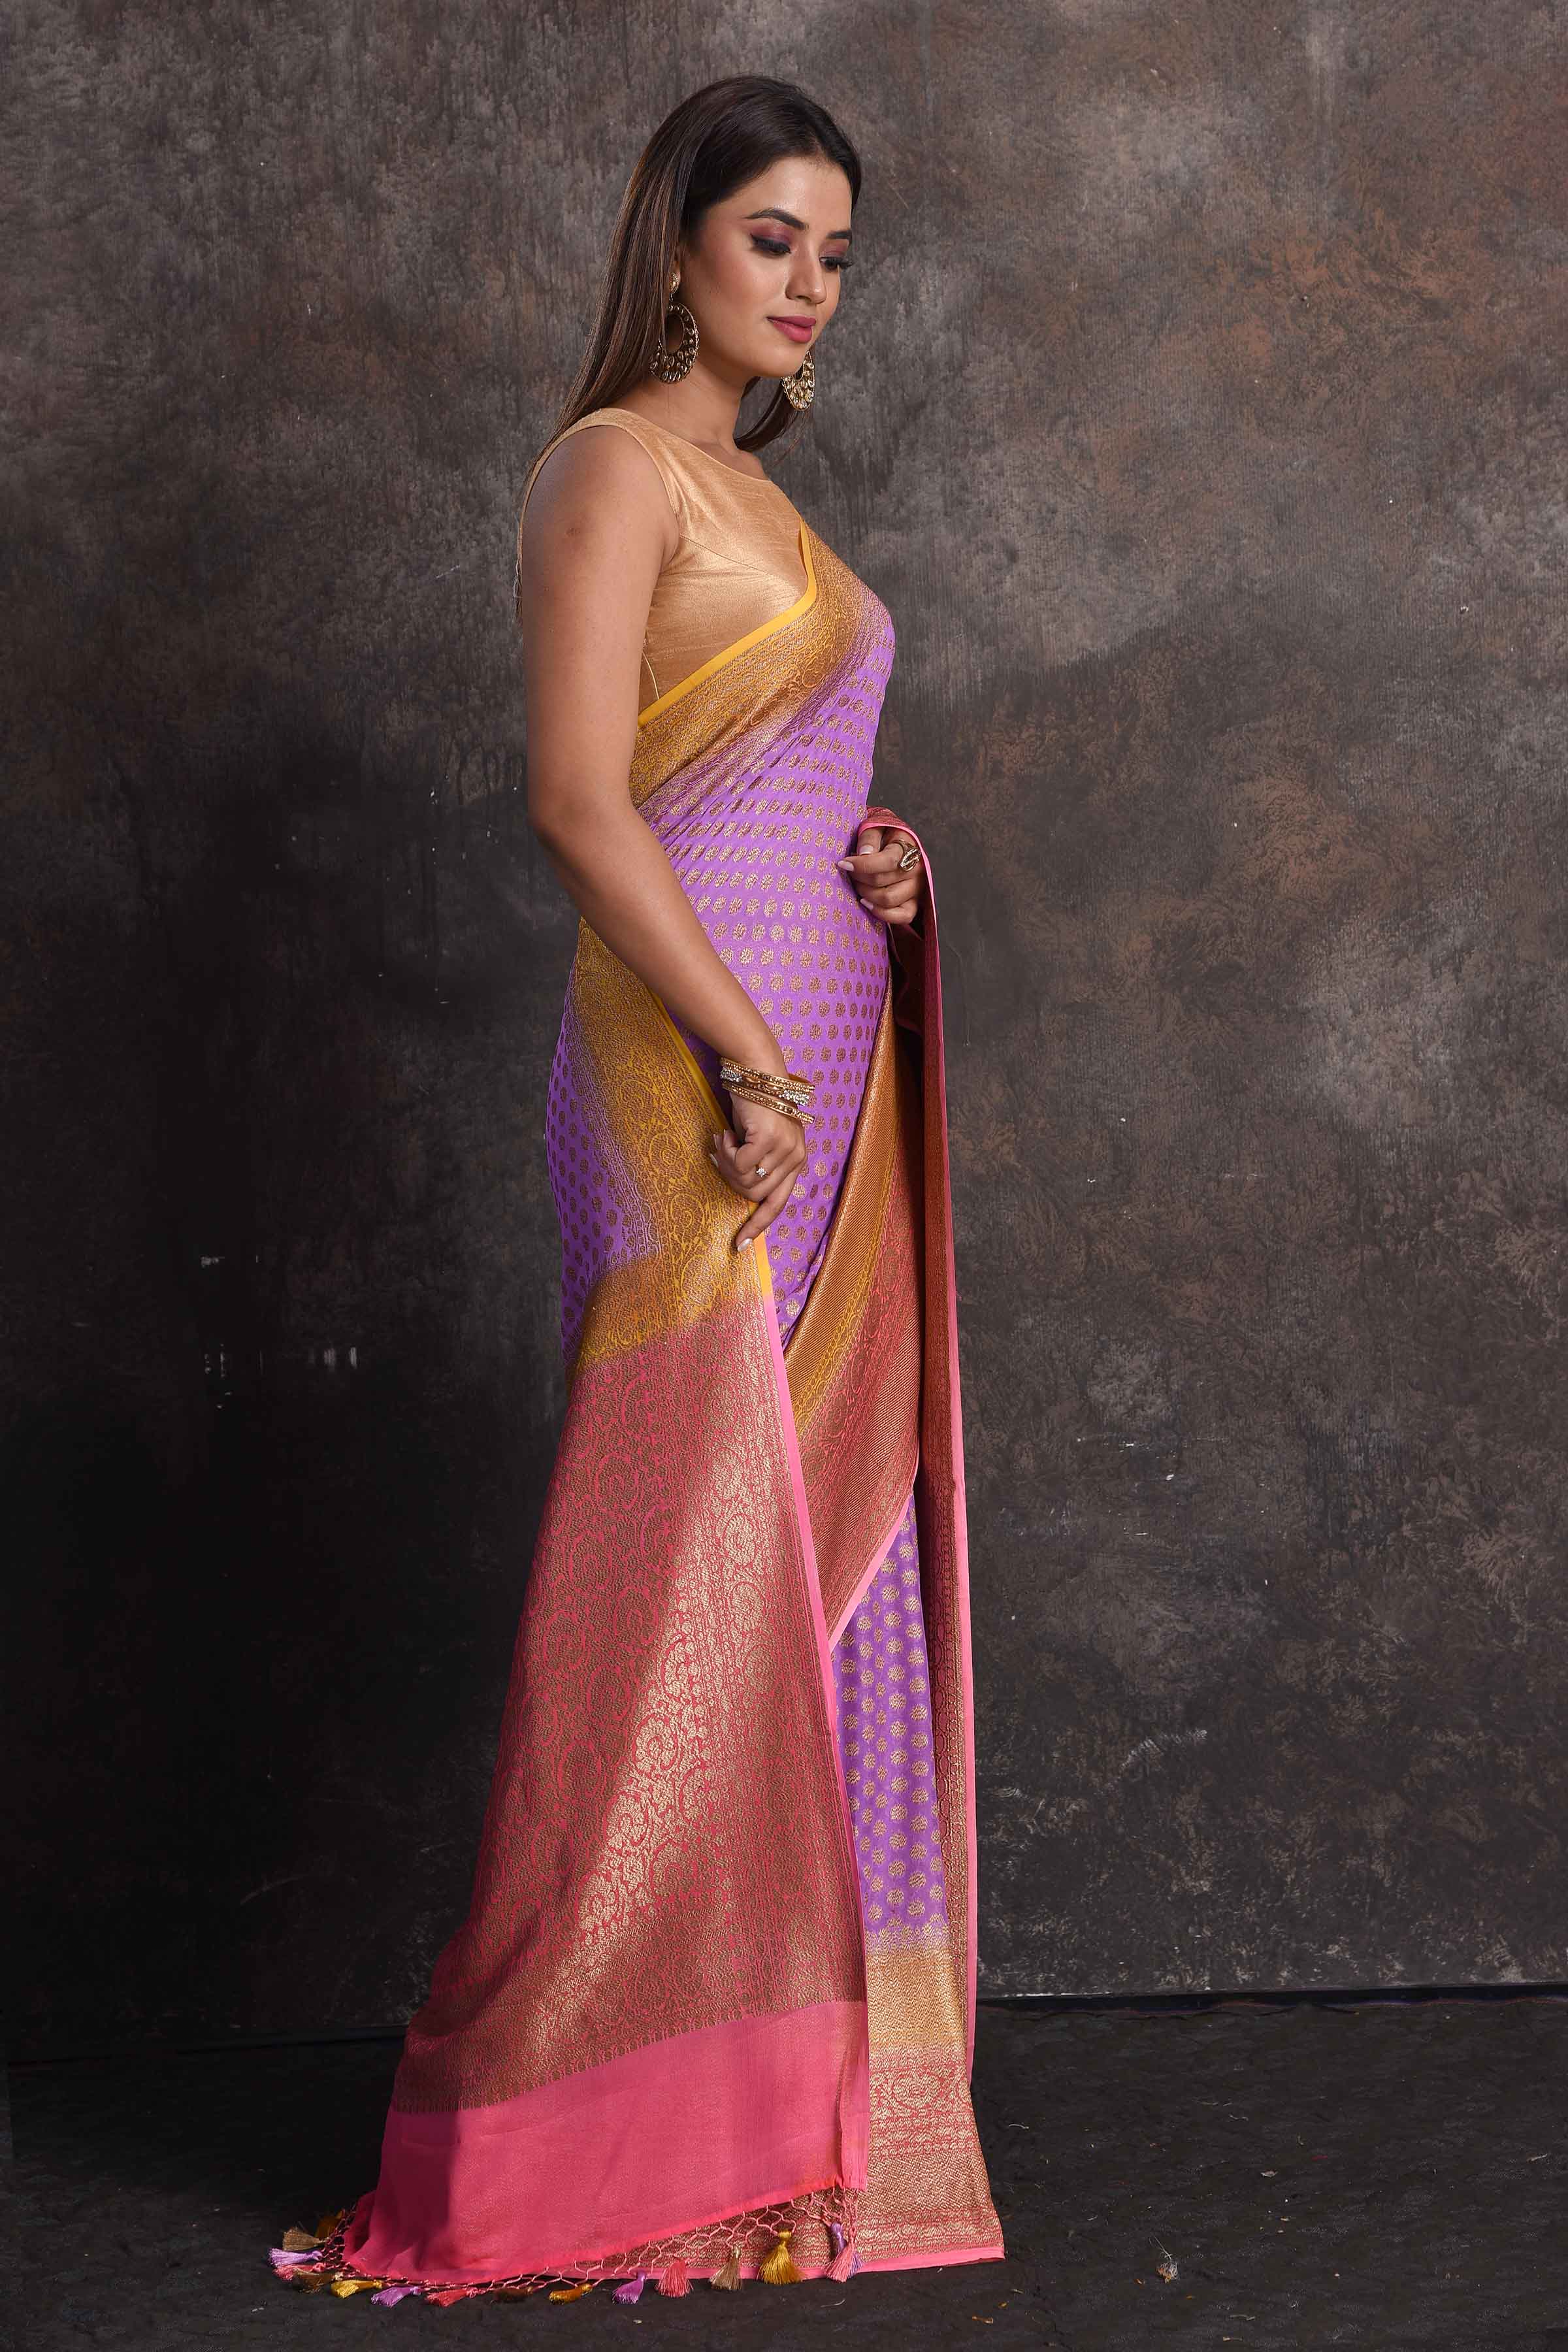 Buy beautiful lavender georgette Banarasi saree online in USA with pink and yellow border, Be a vision of ethnic elegance on festive occasions in beautiful designer sarees, silk sarees, handloom sarees, Kanchipuram silk sarees, embroidered sarees from Pure Elegance Indian saree store in USA. -right